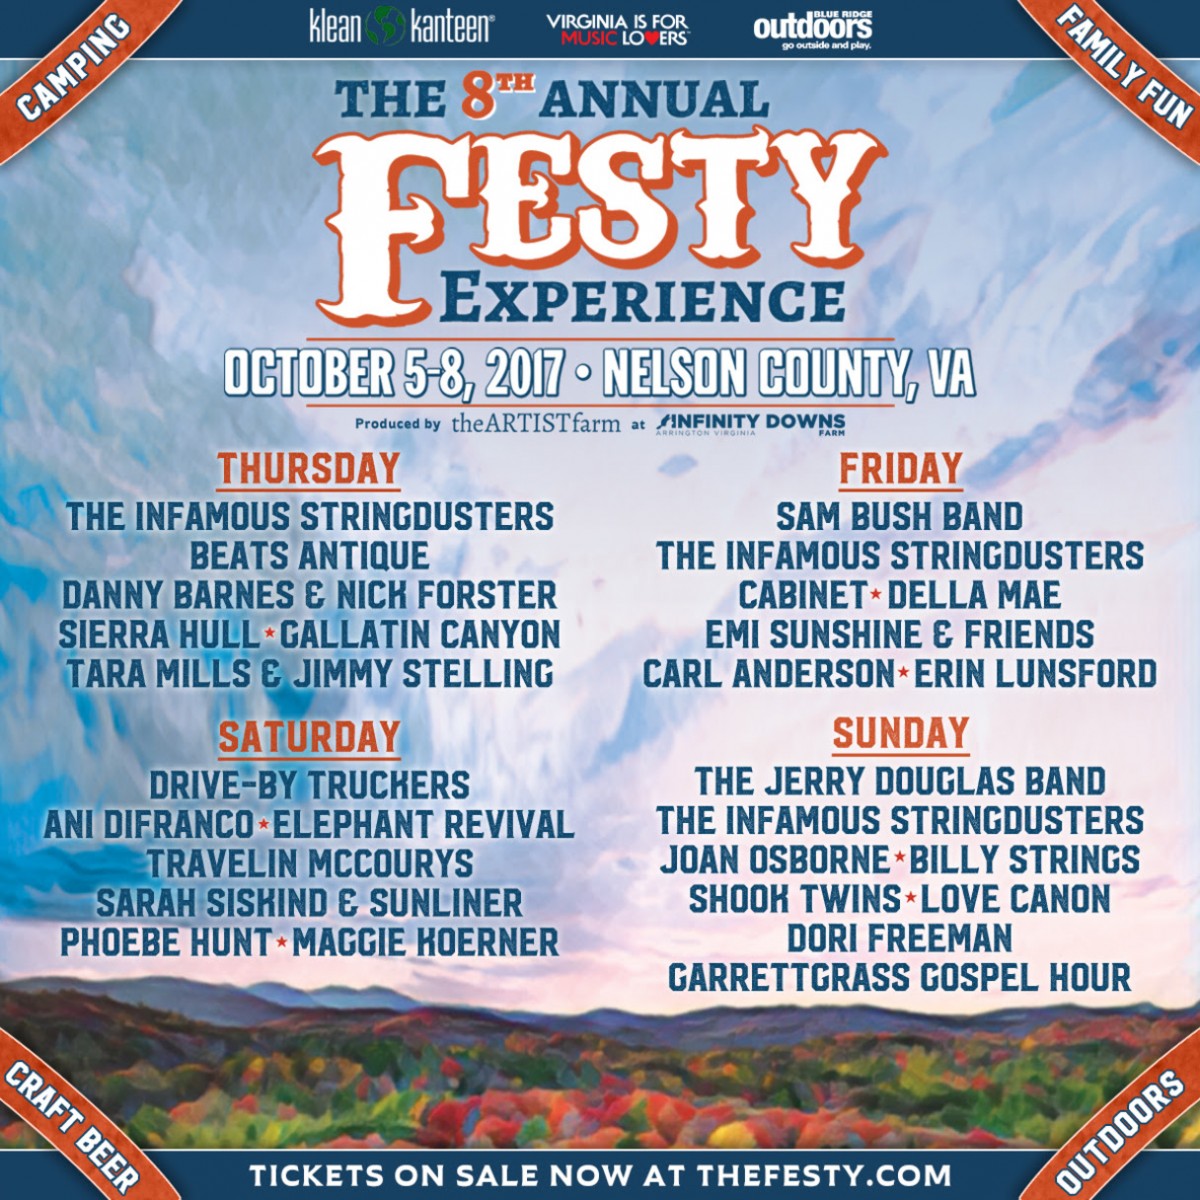 The 8th Annual Festy Experience